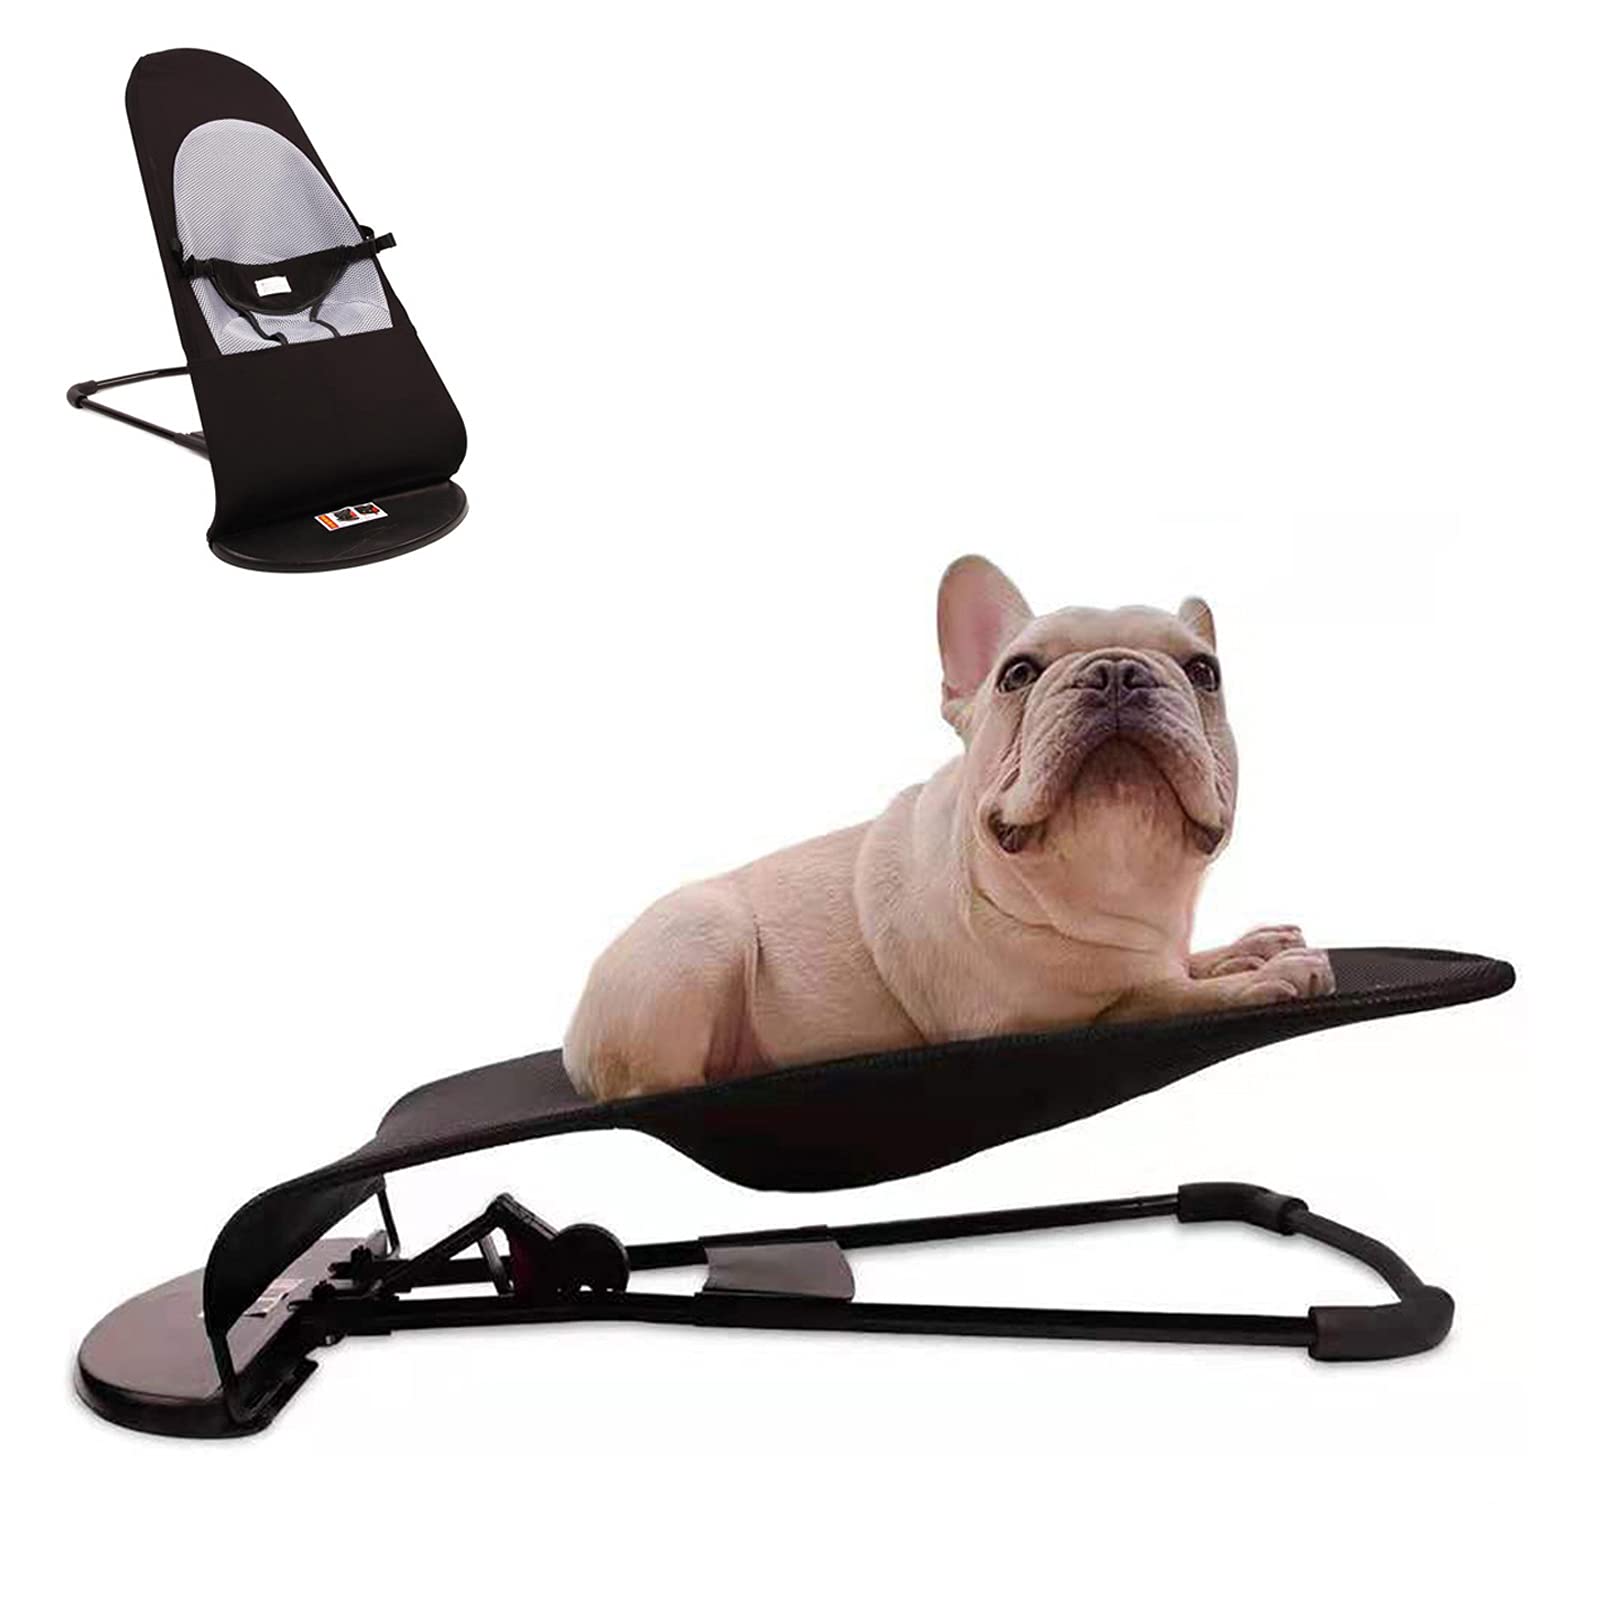 Ngiftey Dog Rocking chair Portable cat Rocking chair Winter Pet Dog Bed cat Sofa Foldable Rocking chair Small Pet Rocking Bed